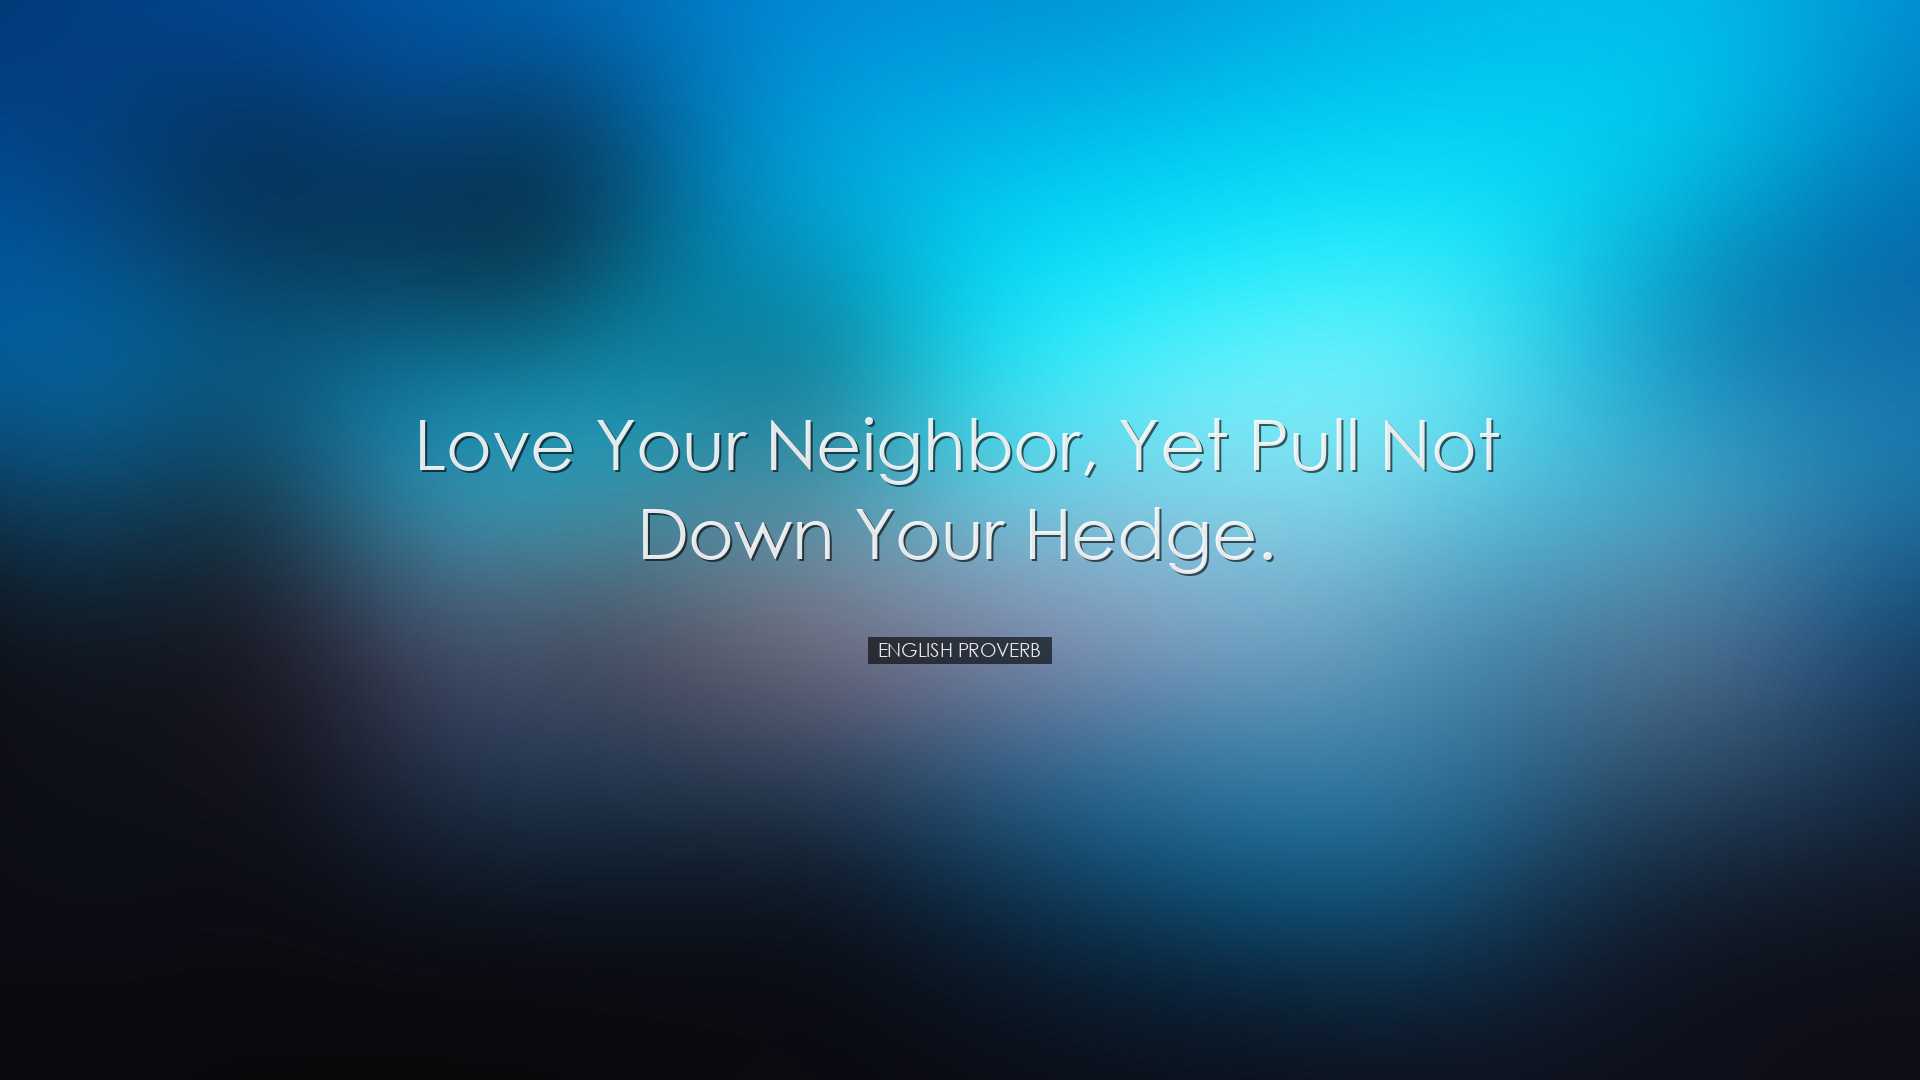 Love your neighbor, yet pull not down your hedge. - English Prover